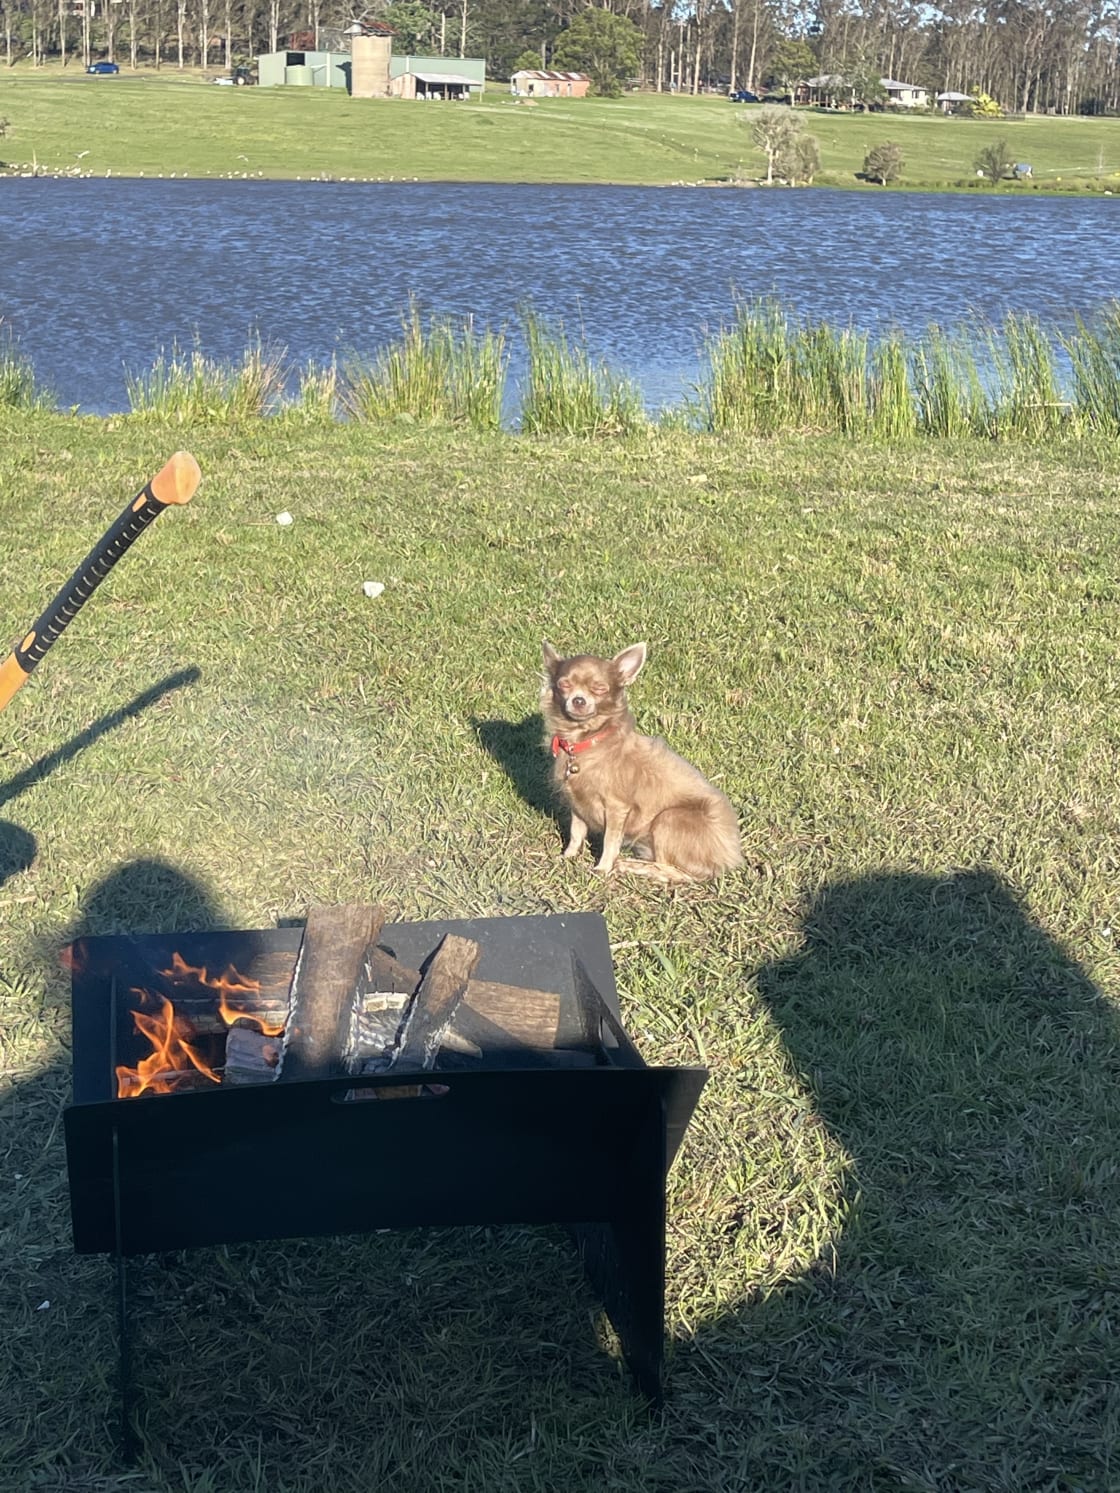 Our fur baby warming by the fire pit 